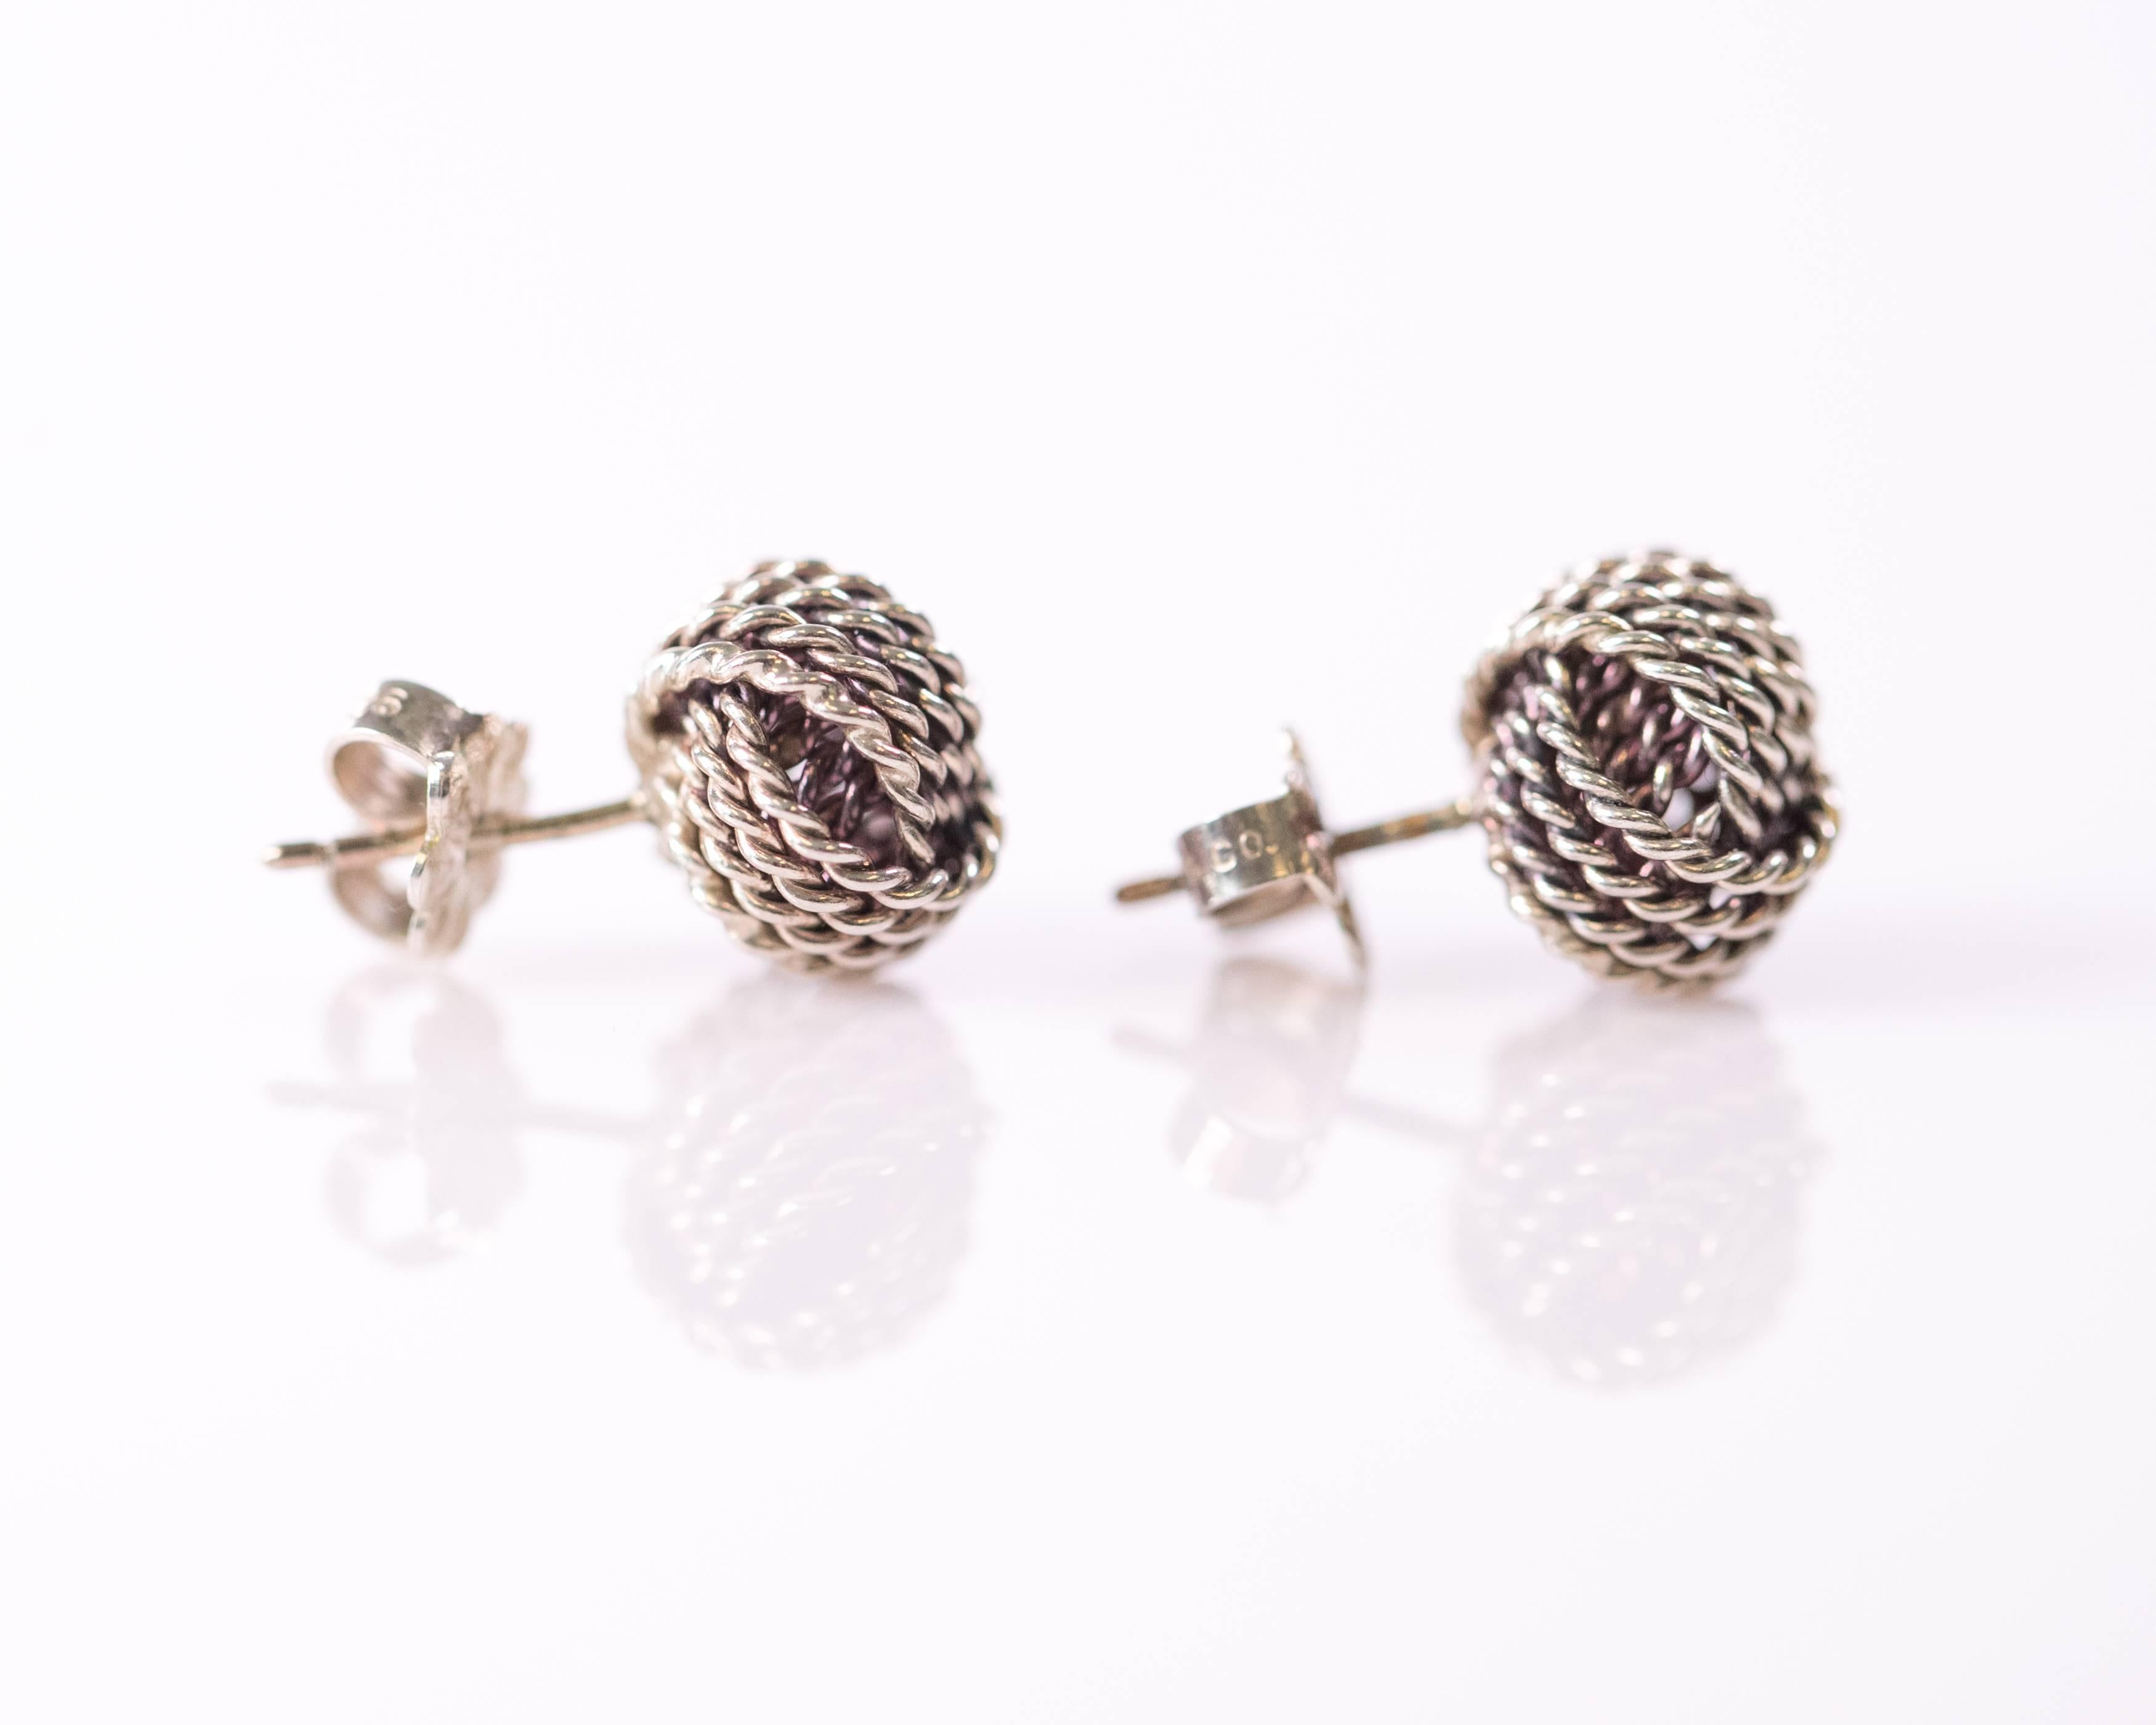 These Tiffany and Co. Sterling Silver Twist Knot Earrings are a Vintage Classic. They measure 8 millimeters across and feature 3 overlapping bundles of 4-strand twisted cable sections which combine to form a single knot.  They have push back posts